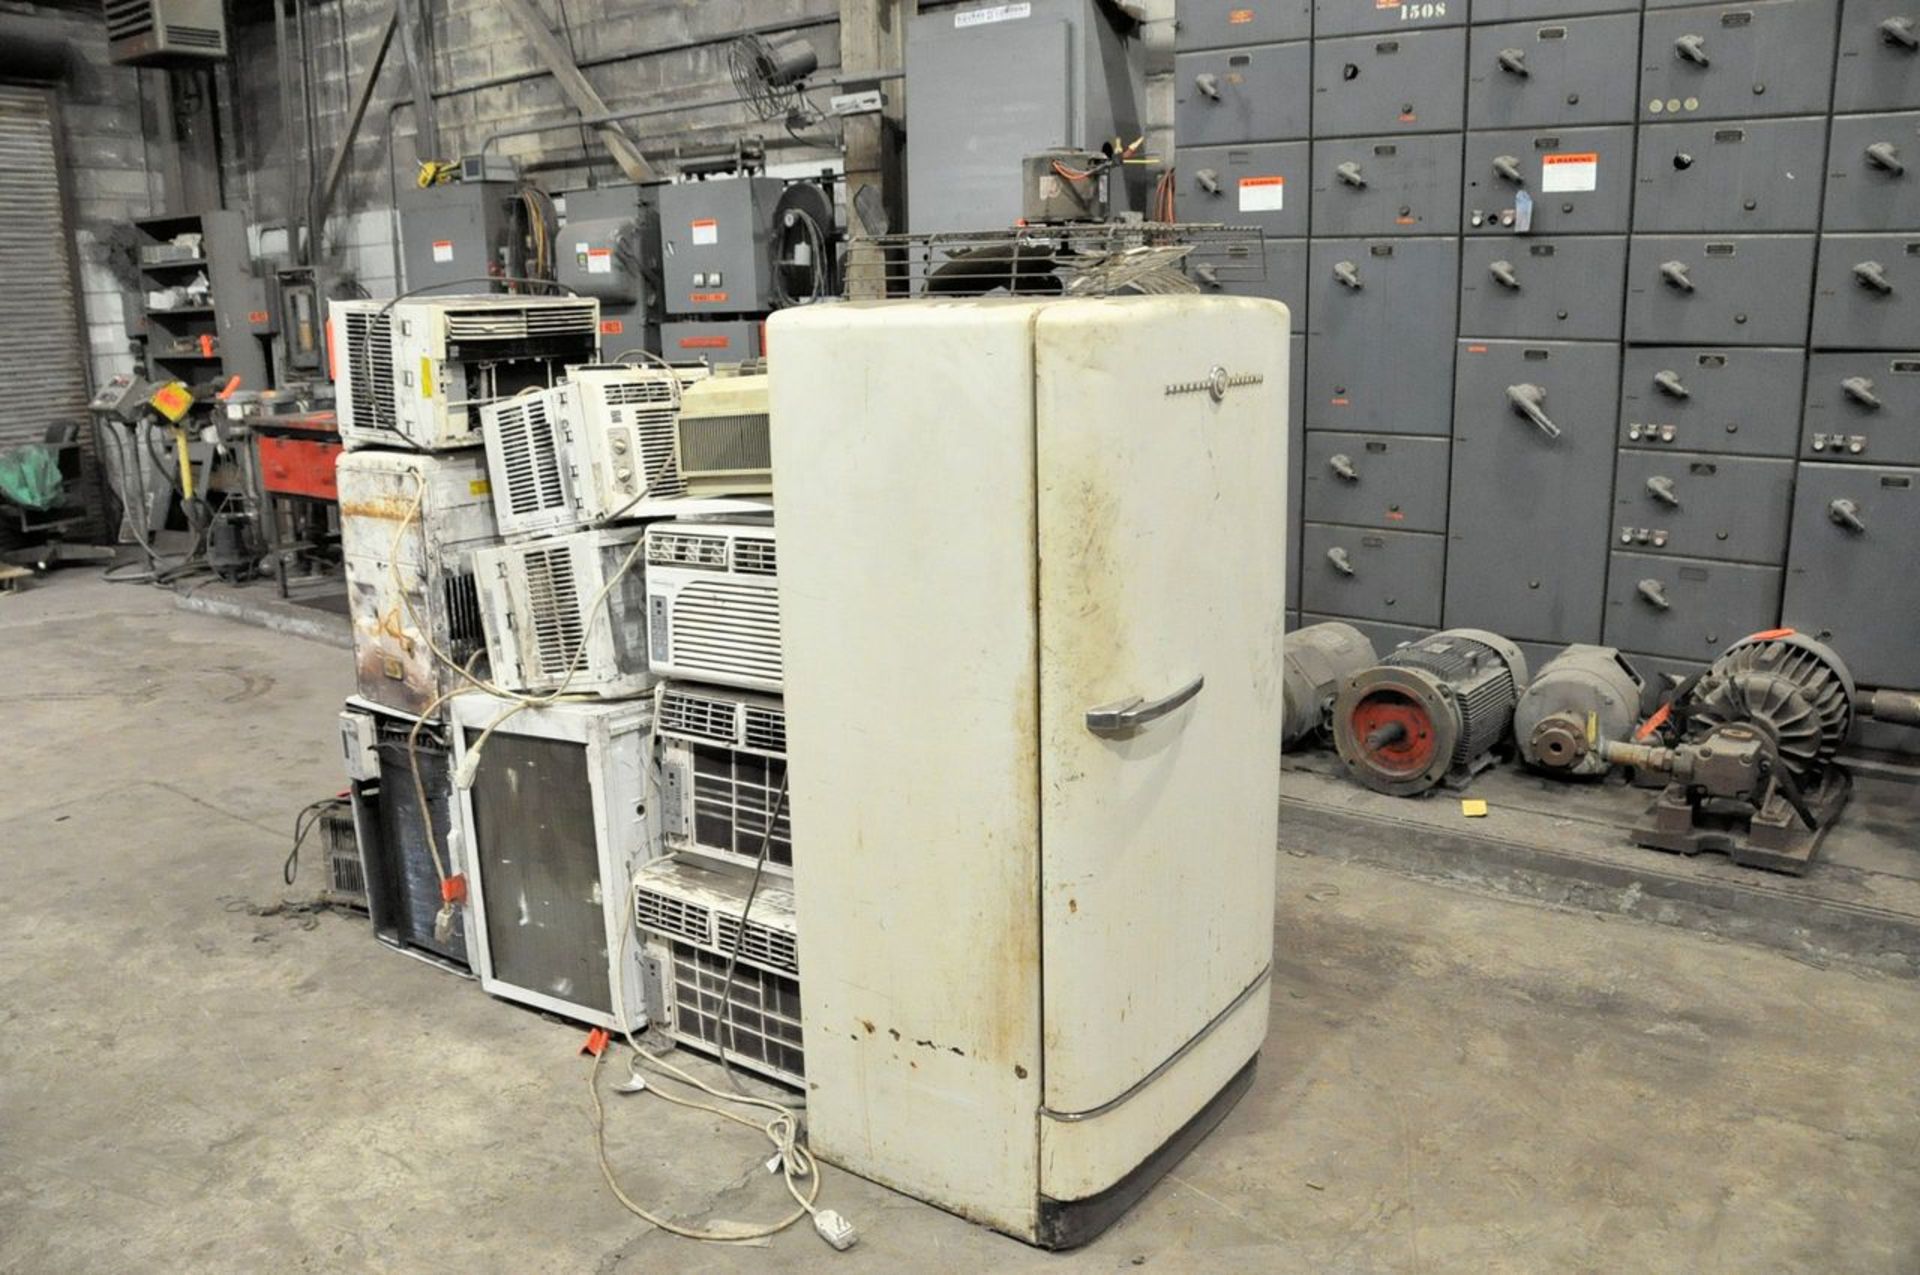 Lot - Air Conditioners and Refrigerator in (1) Group, (Mill Annex Sub Electrical Room) - Image 2 of 2